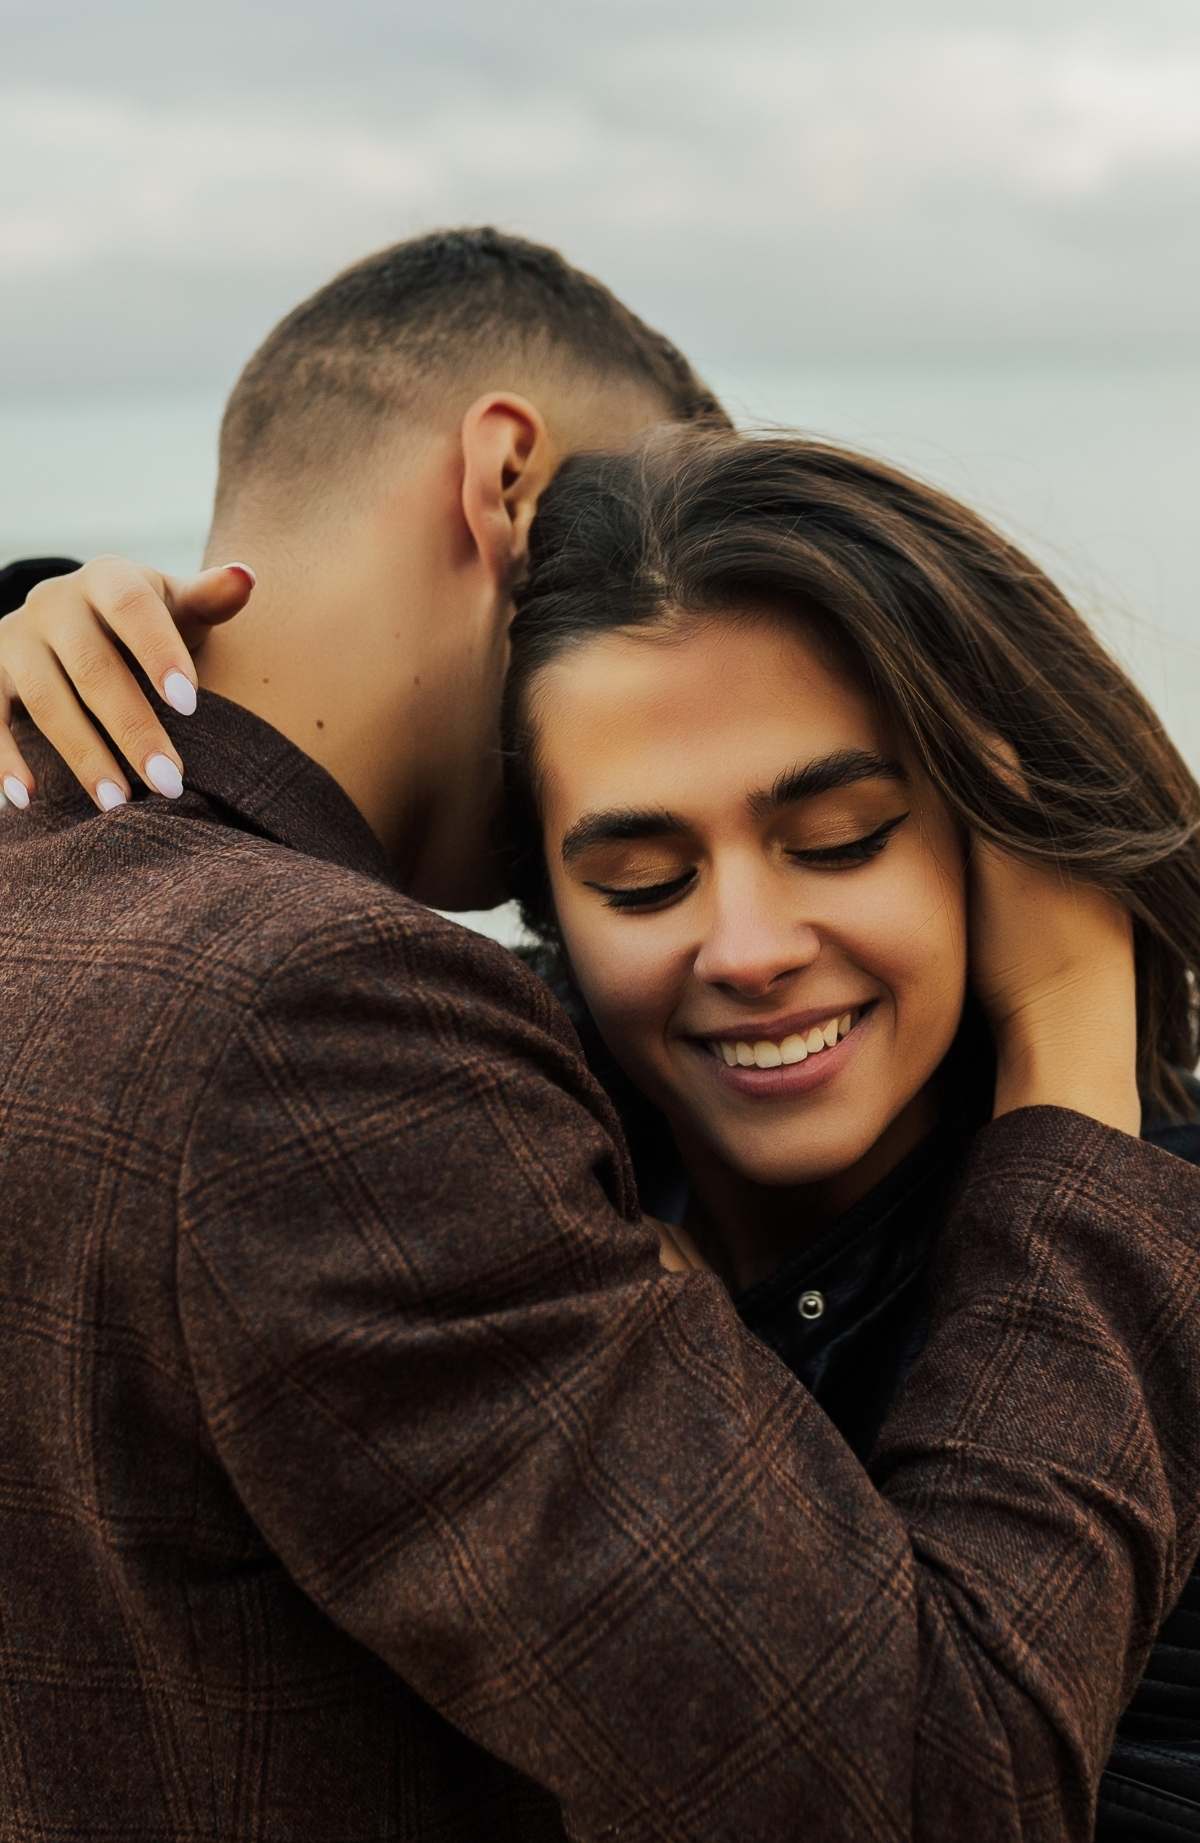 All marriages go through ups and downs, but there is something you can do to not only help your marriage survive, but also thrive. It’s called emotional intimacy. Here is what emotional intimacy is and why your marriage needs it.